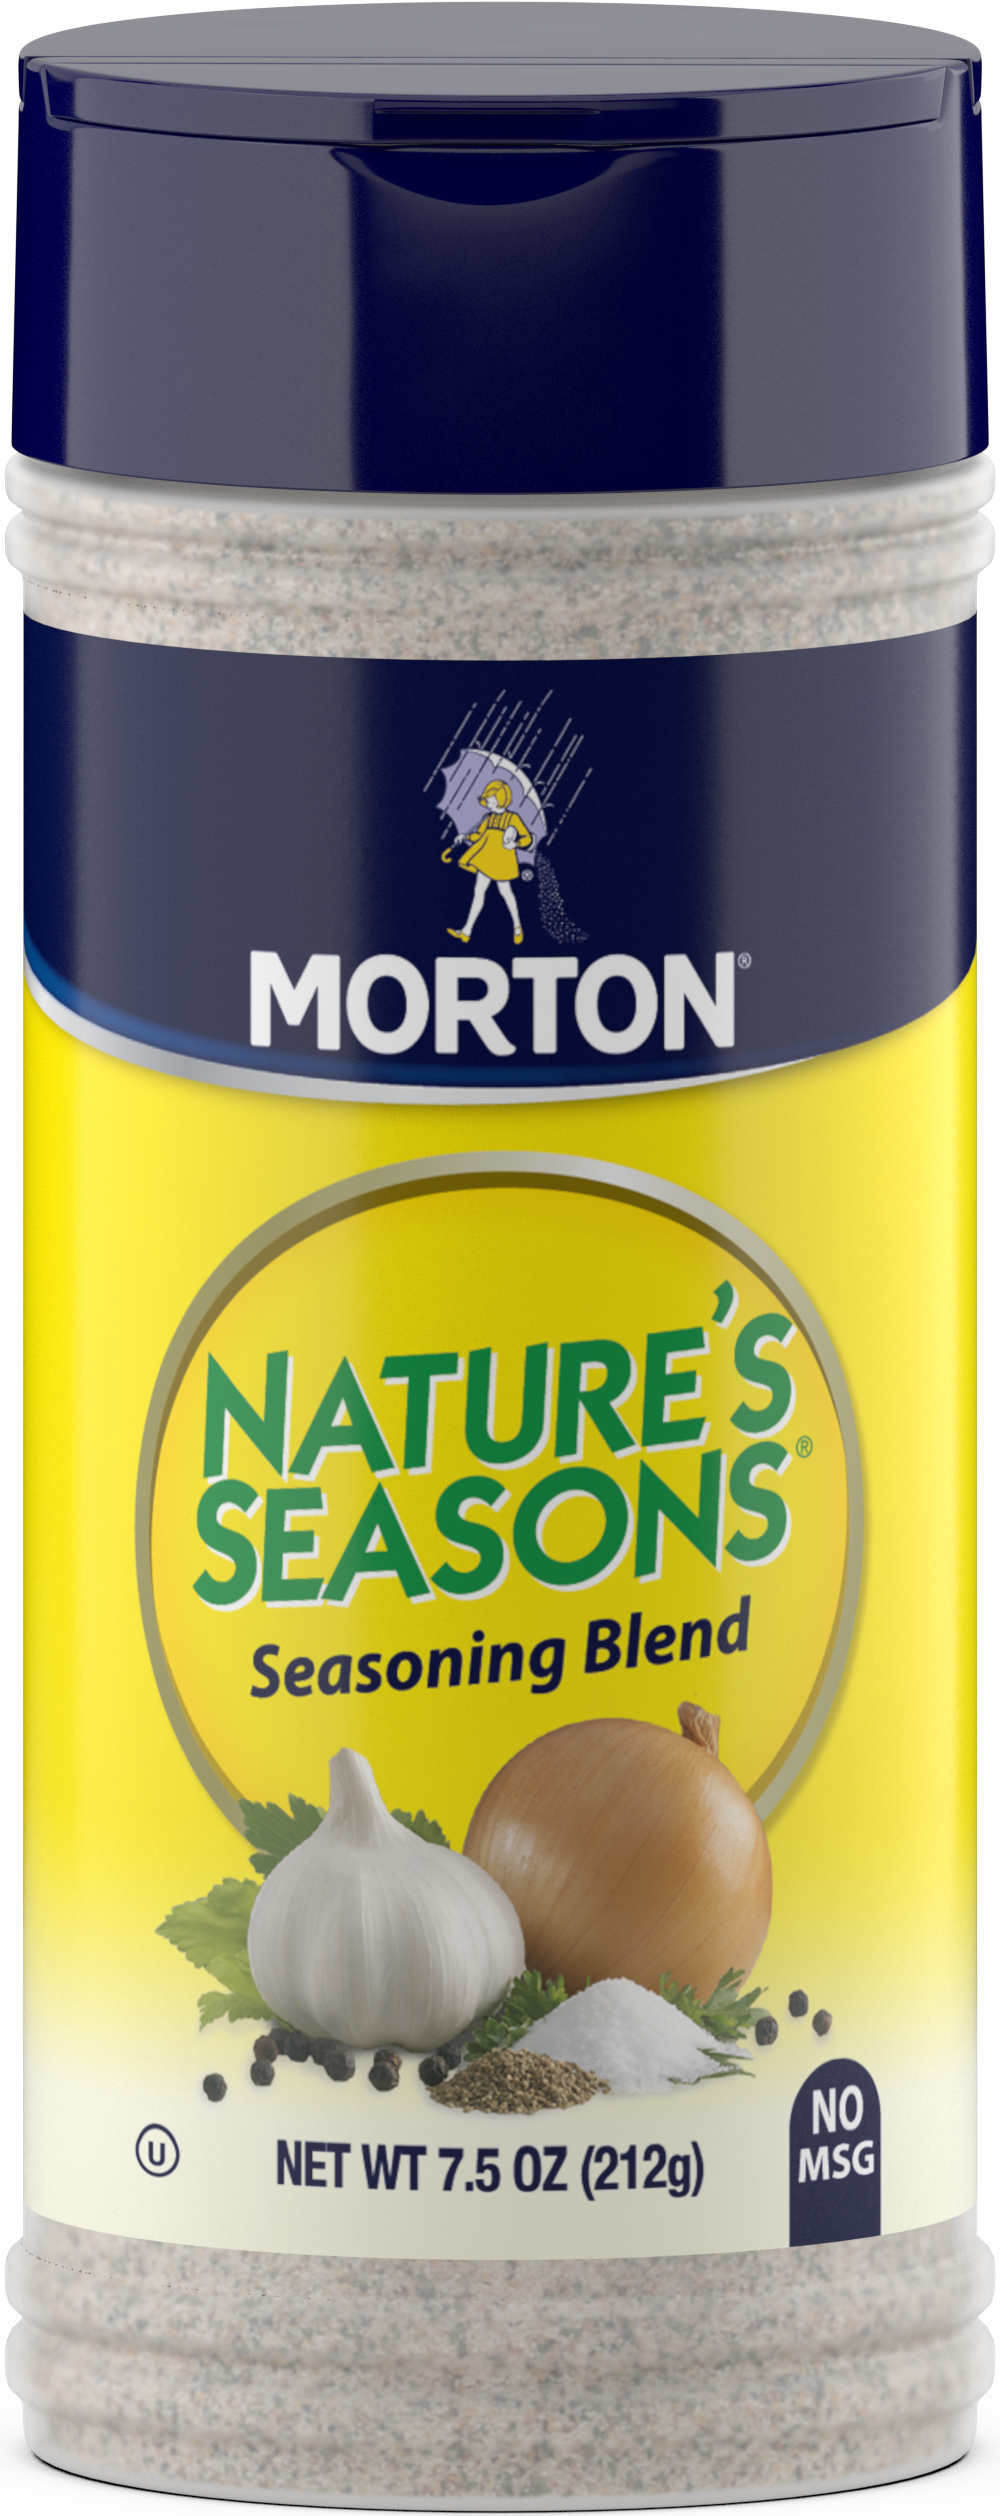 Morton Nature's Seasons Seasoning Blend - Savory Blend of Spices for  Lighter Fare, 4 oz Canister 